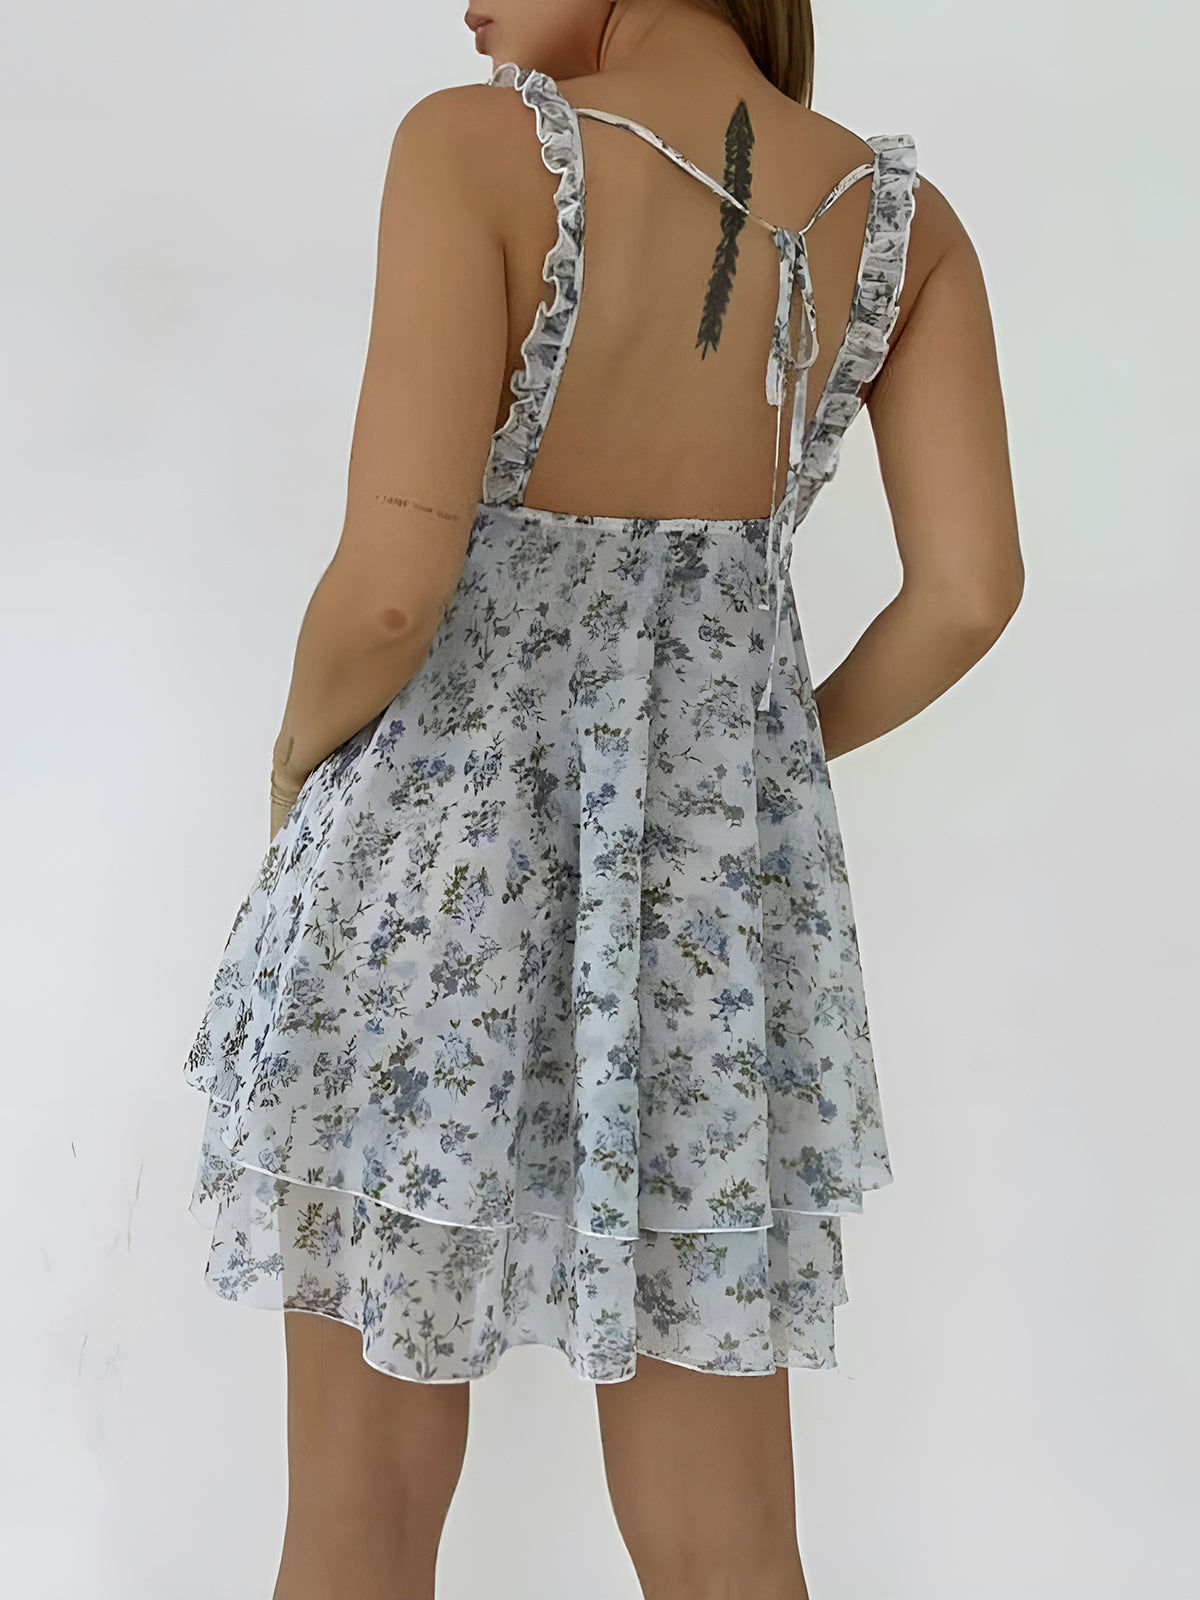 Multi Floral Backless Knotted Short Dress